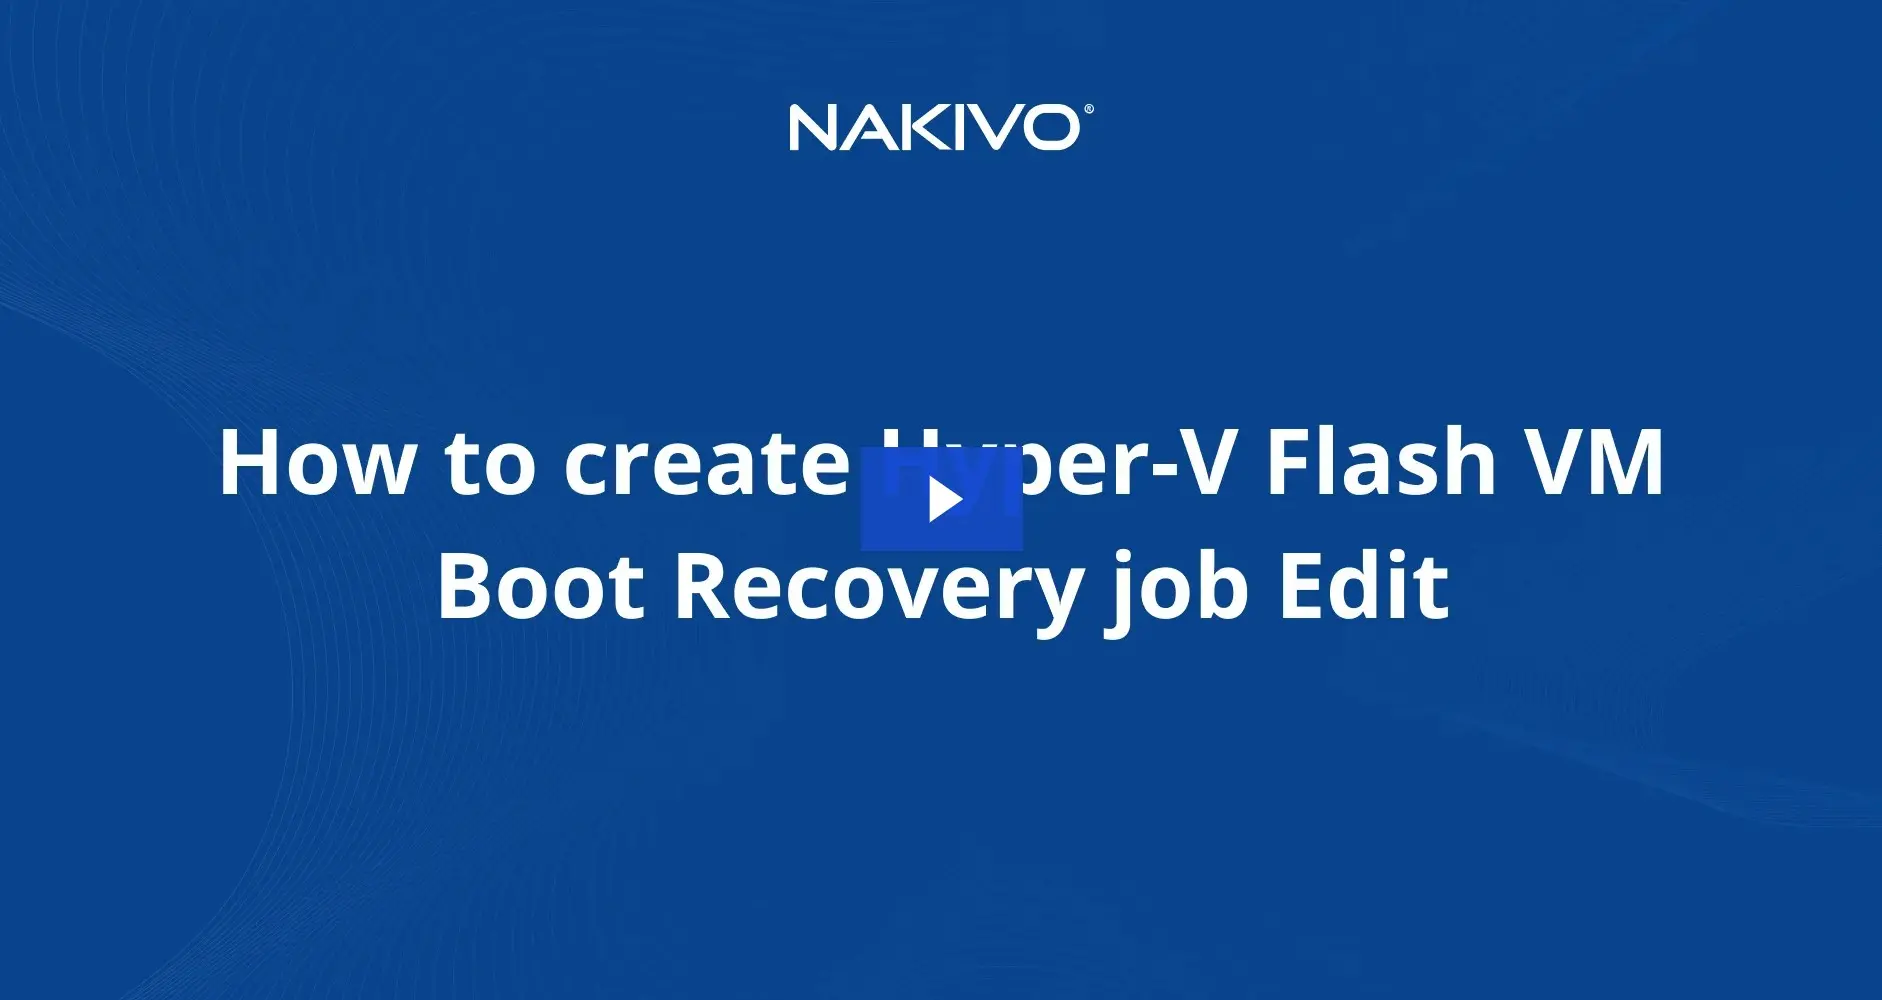 how to create hyper-v flash vm boot recovery job edit video cover